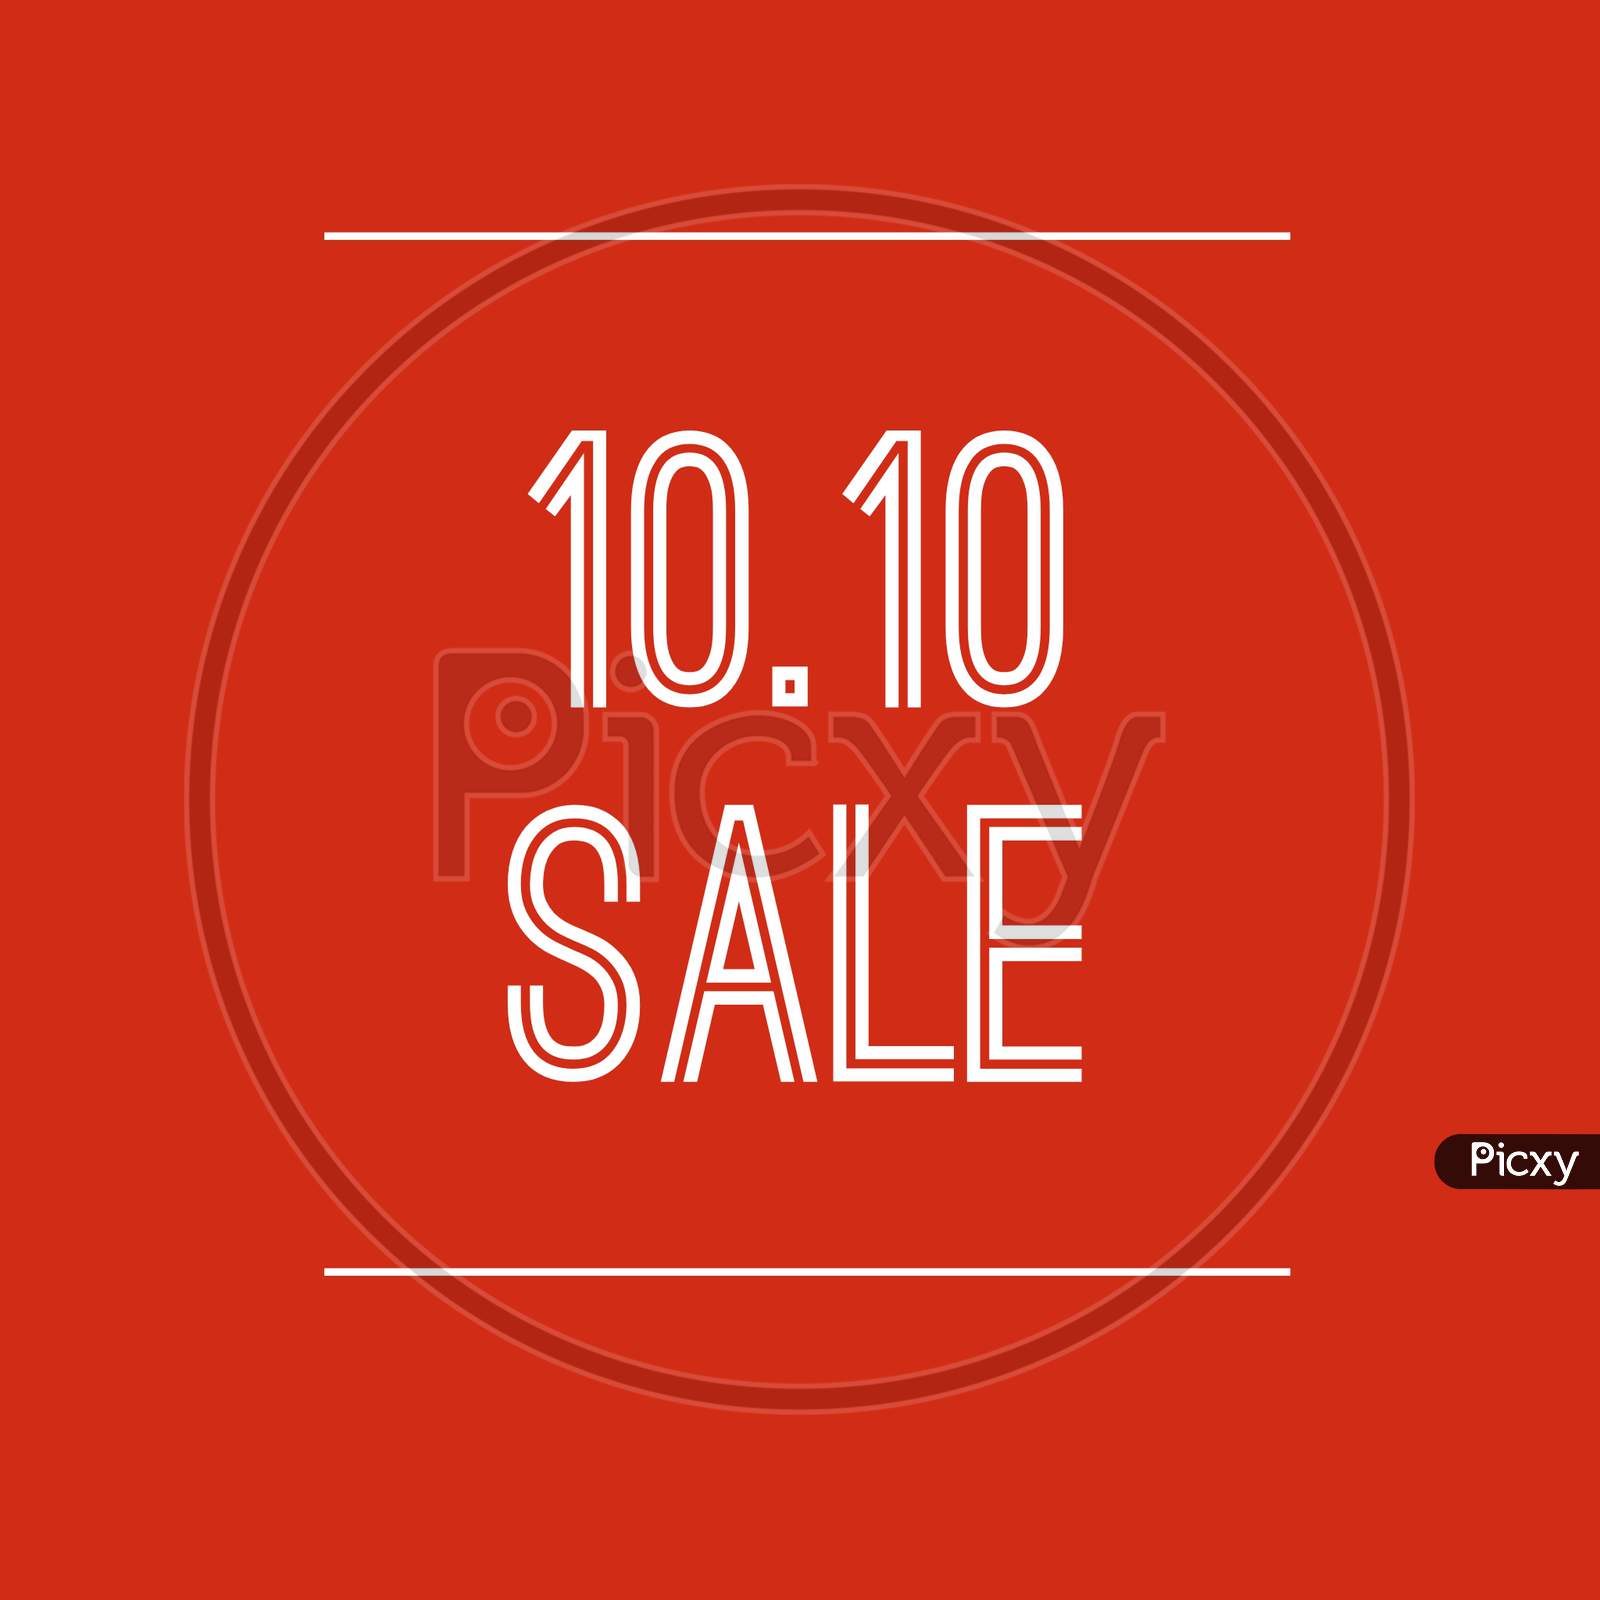 Image With A Text"10.10 Sale"